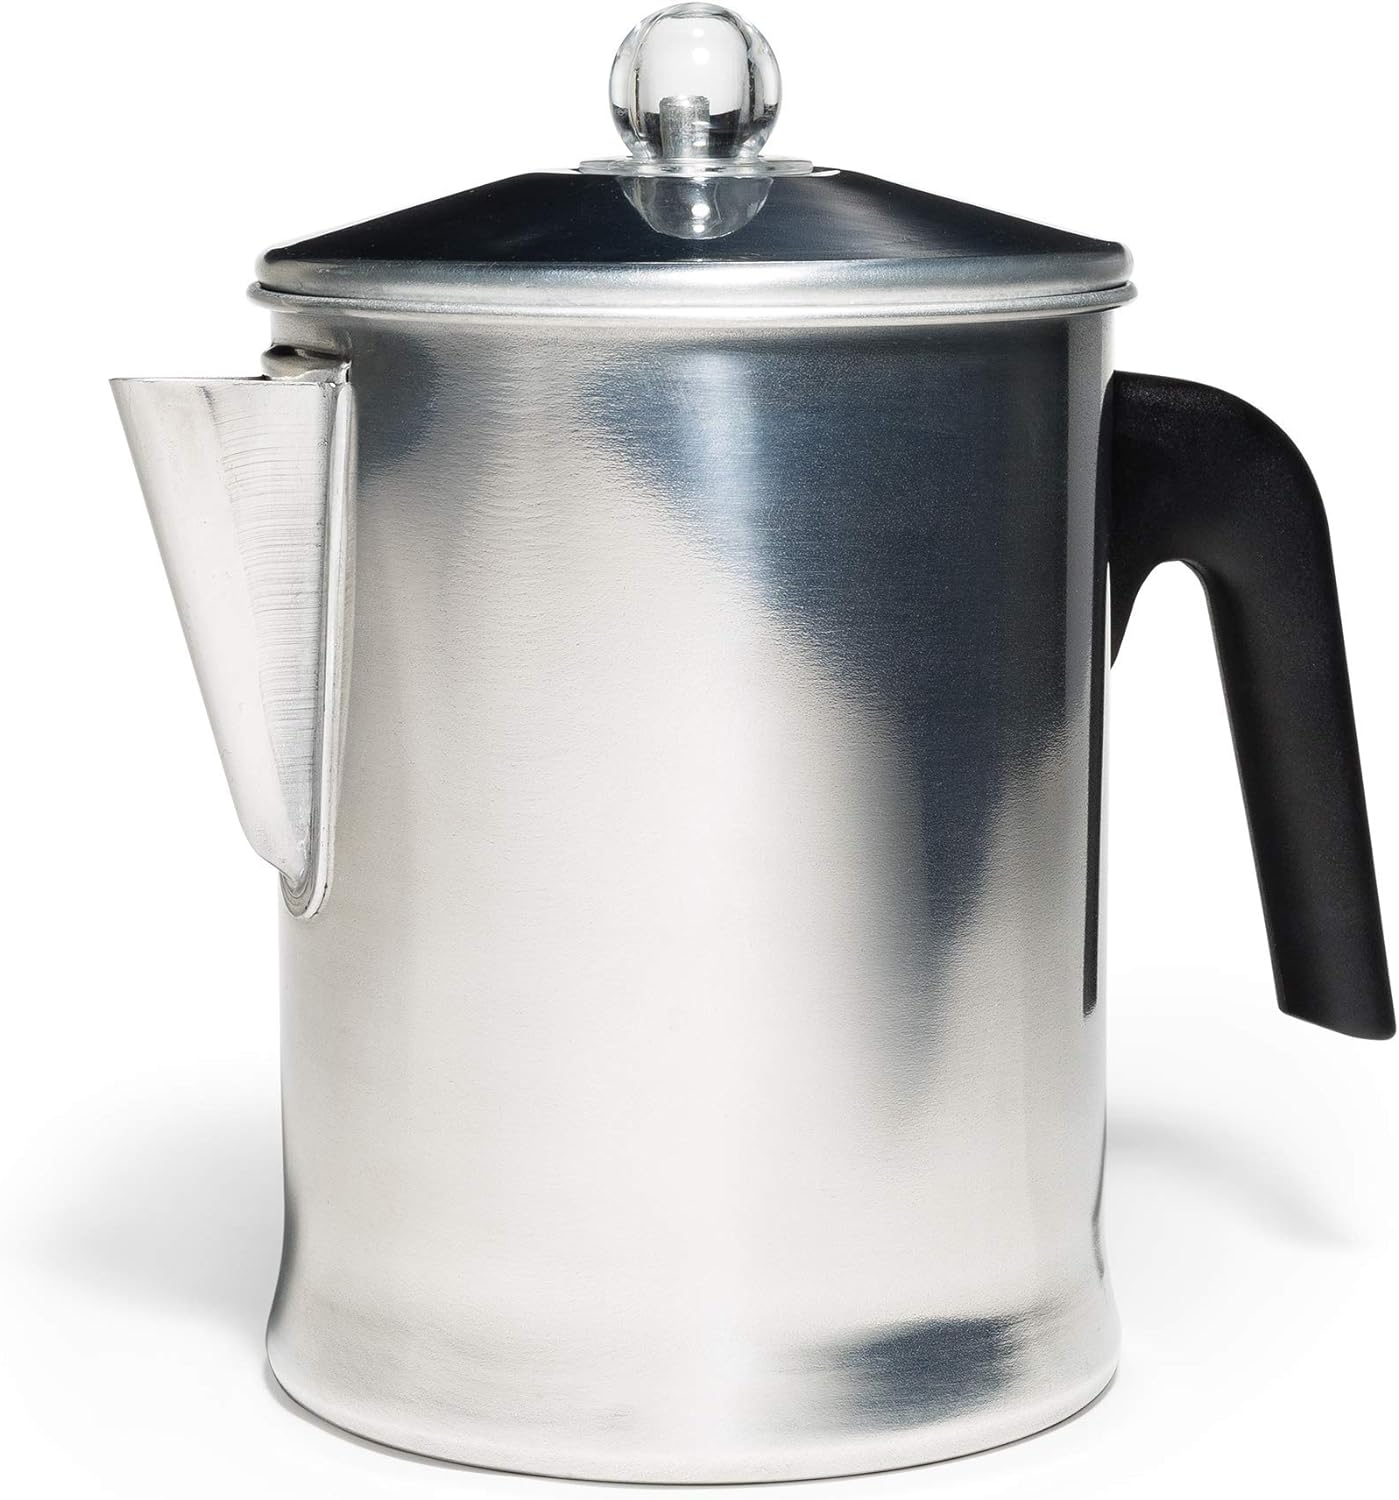 Aluminum Stove Top Percolator Maker Durable, Brew Coffee On Stovetop (9 Cup)